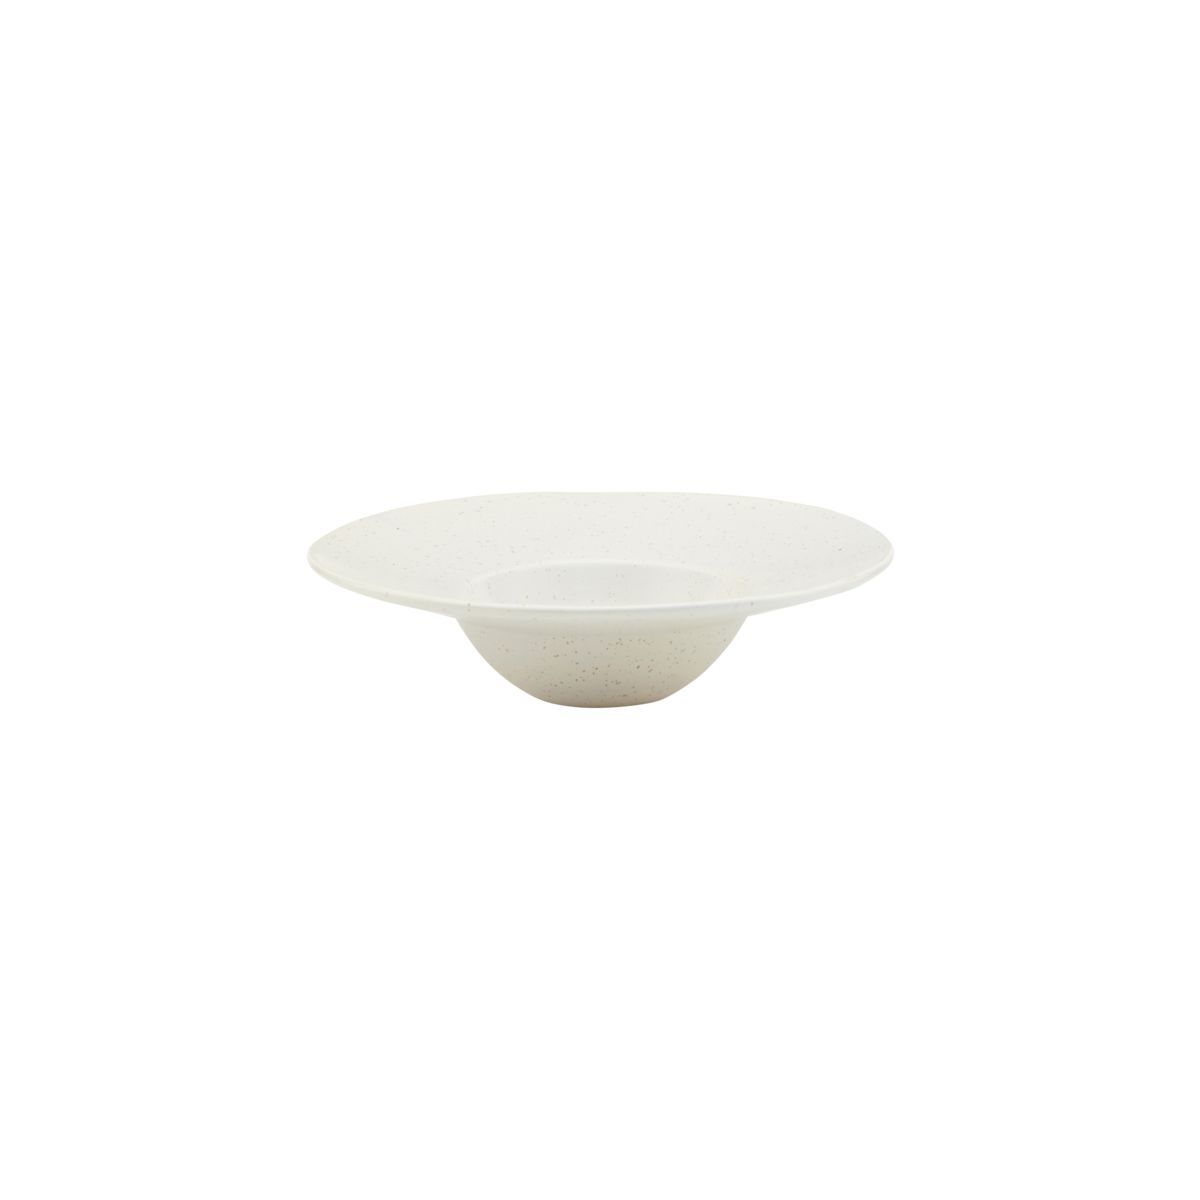 House Doctor Grey Pion Pasta Plate / Bowl